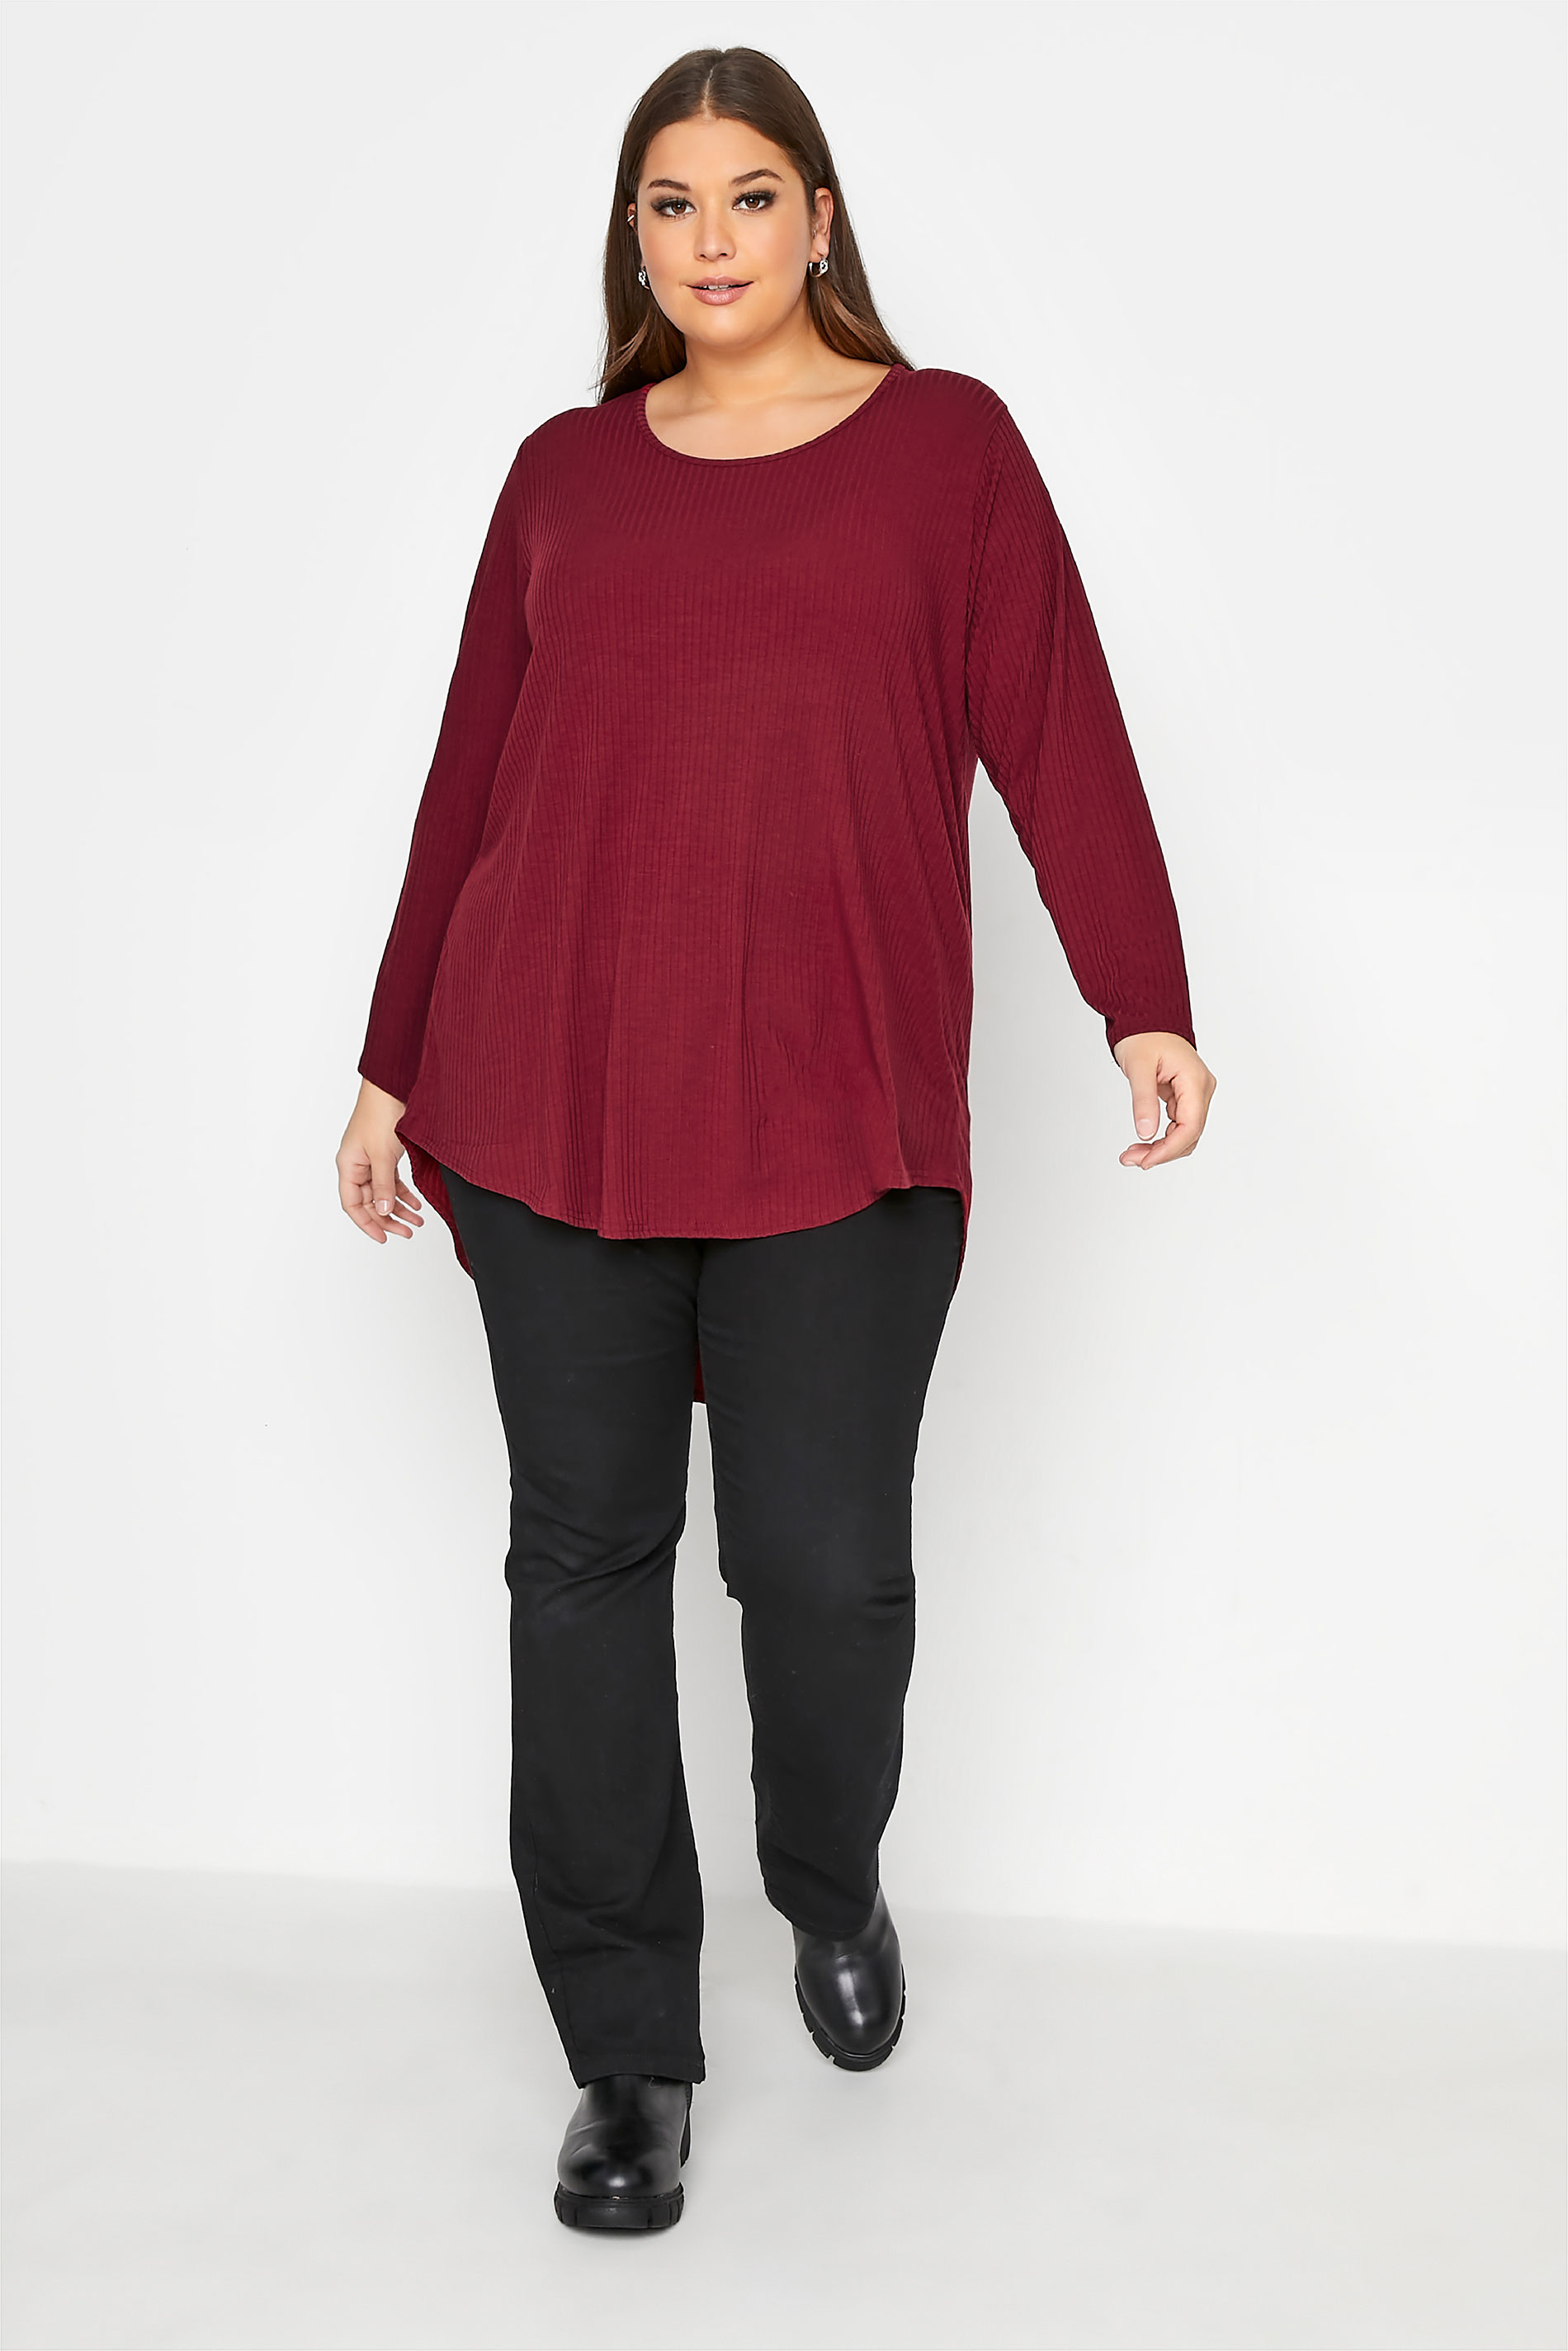 Grande taille  Tops Grande taille  Tops Casual | LIMITED COLLECTION - Top Rouge Vin Nervuré Ourlet Plongeant - AB55042